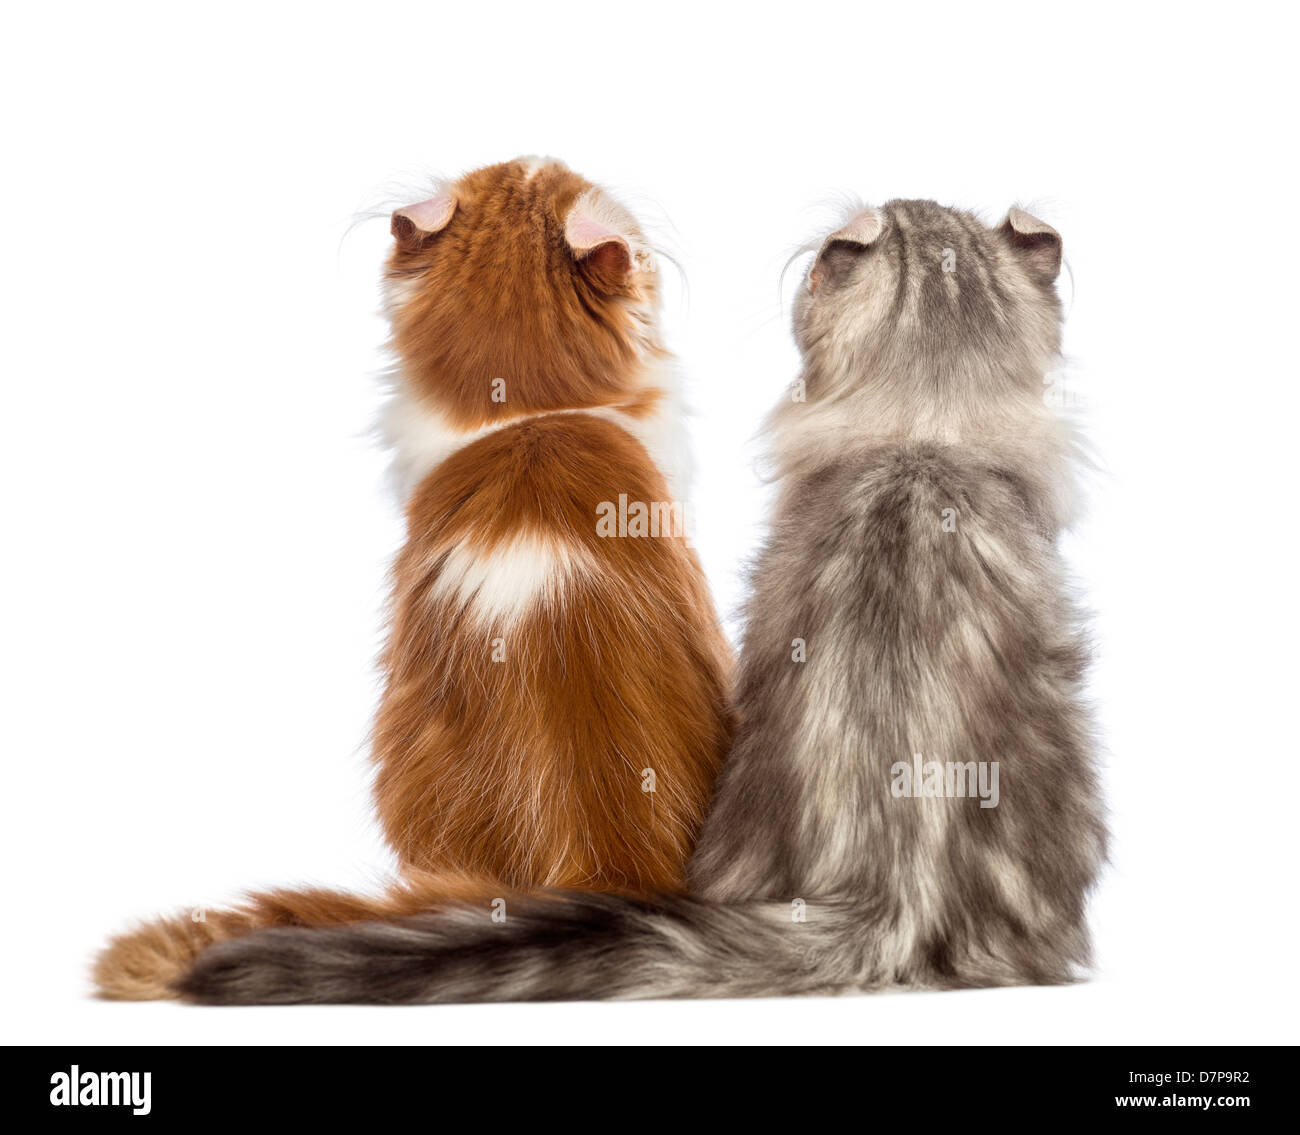 Rear view of two American Curl kittens, 3 months old, sitting and looking up against white background Stock Photo